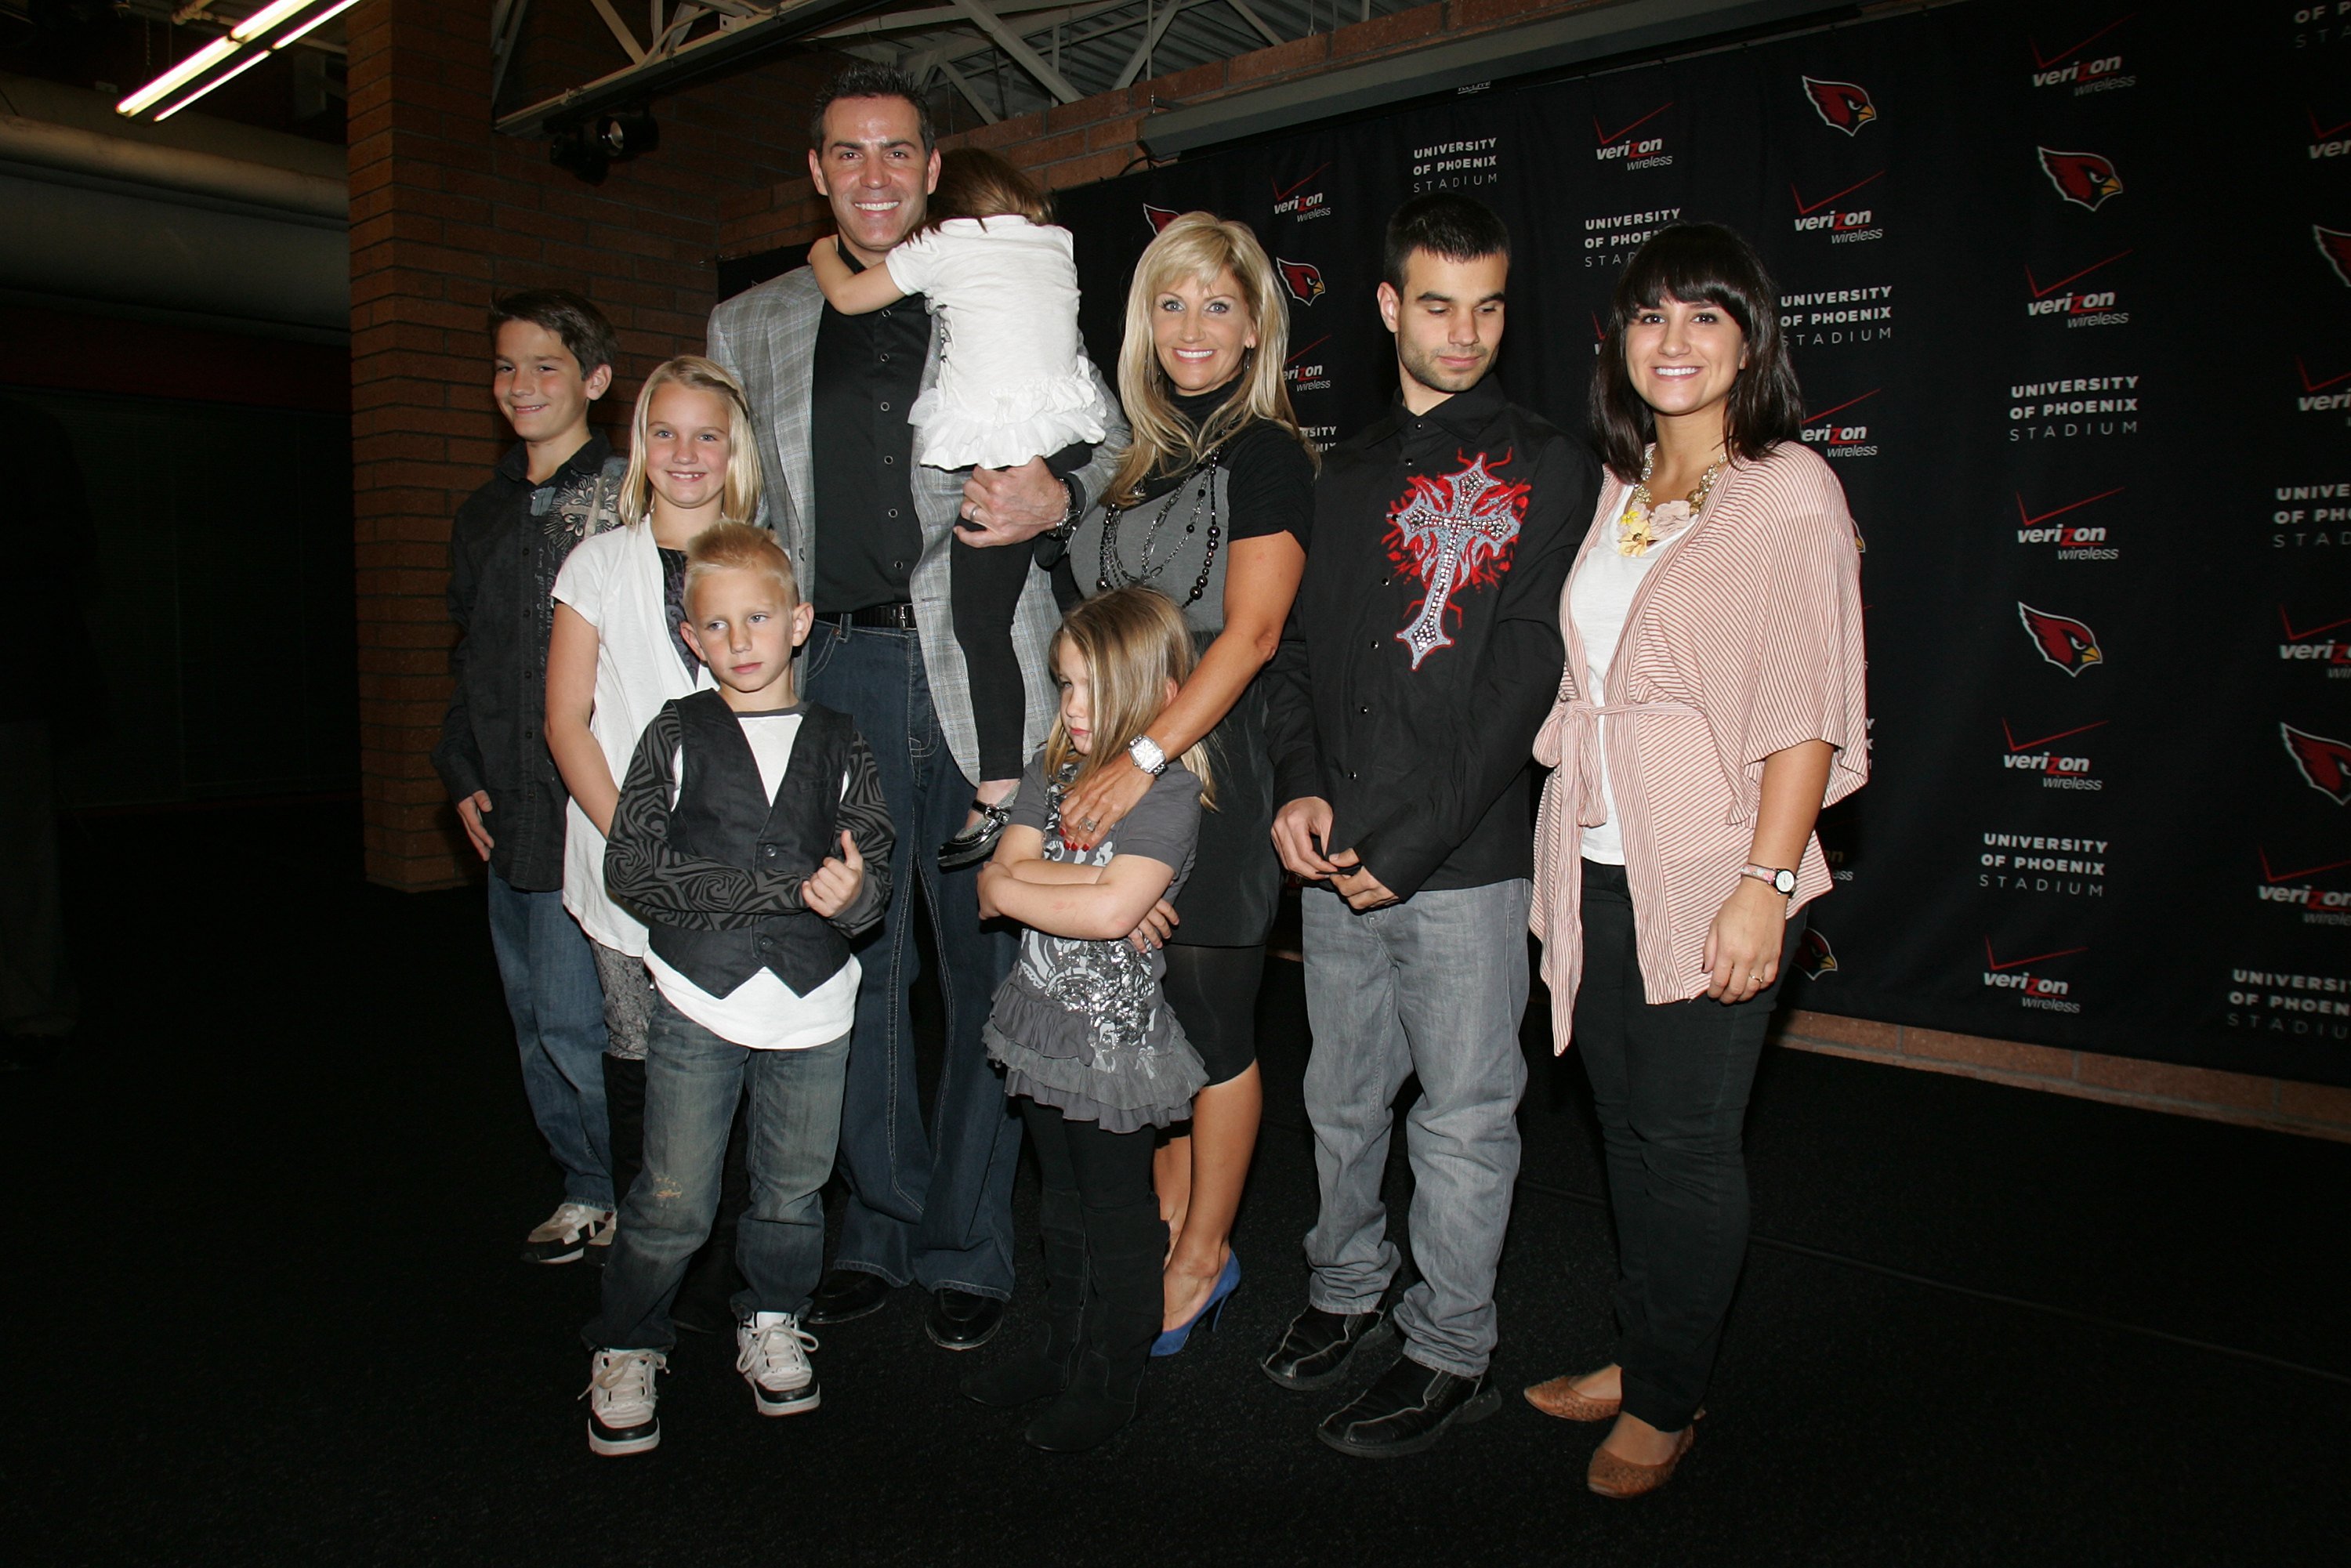 Kurt Warner announced his retirement from Football and posed with his wife and children for photos at the Cardinals training facility in Tempe, Arizona, on January 29, 2010. | Source: Getty Images